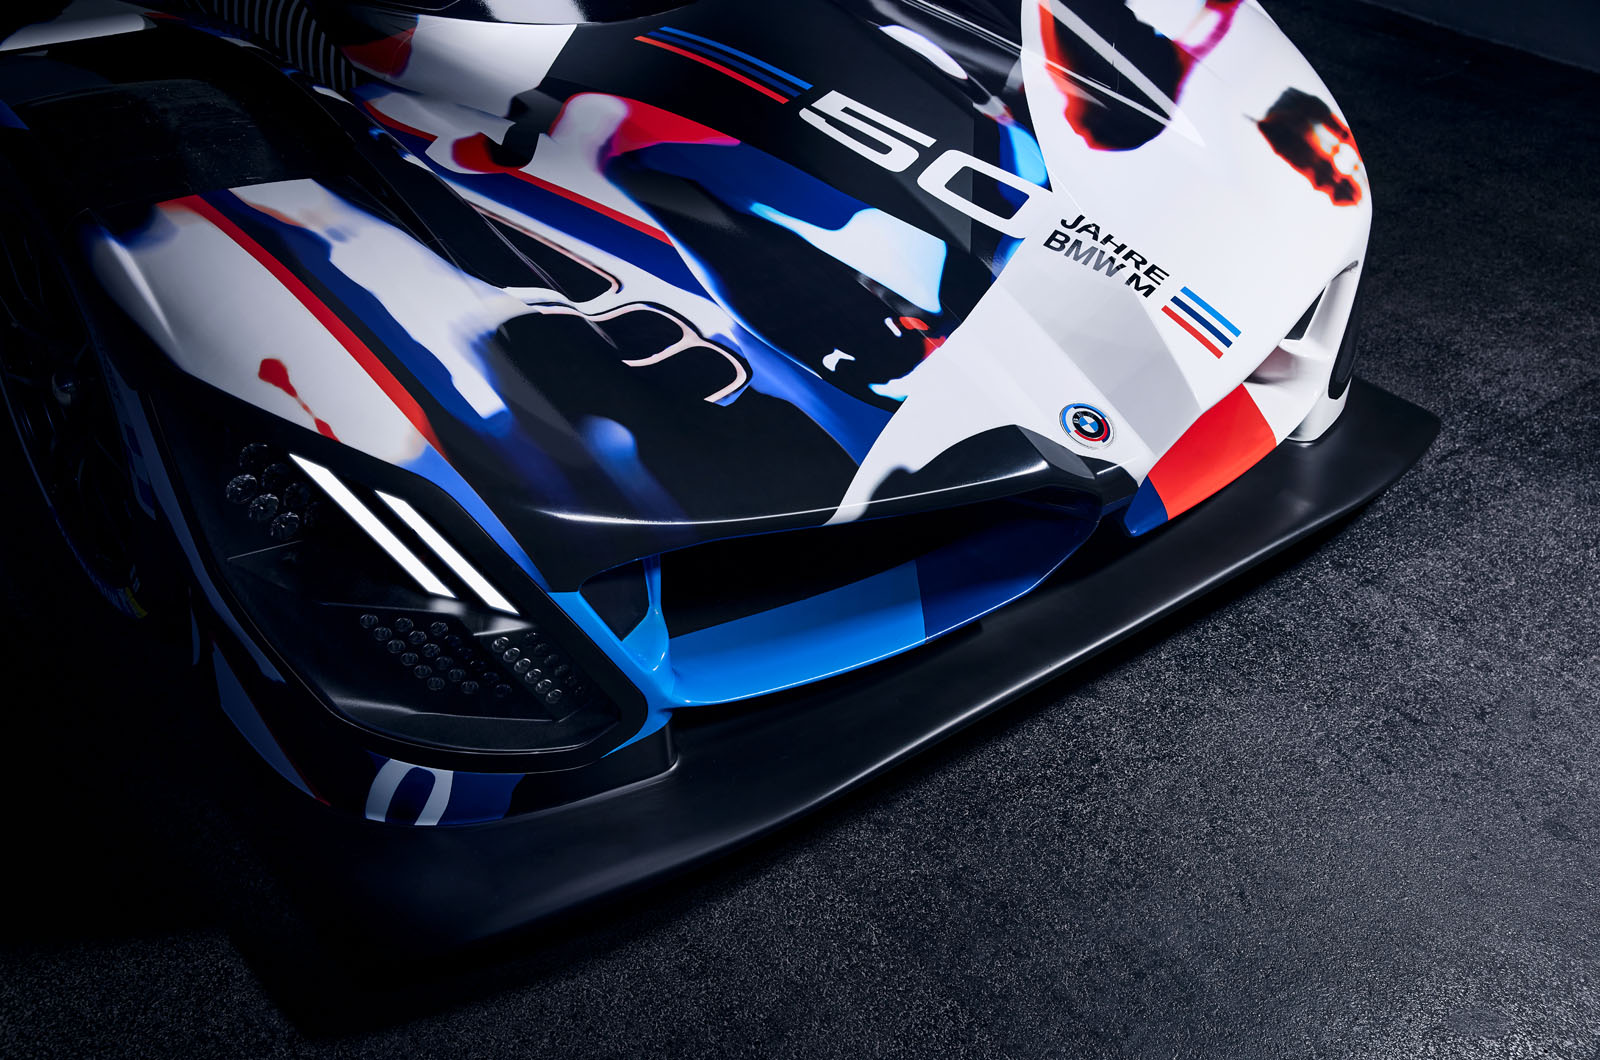 24 Hours of Le Mans – BMW reveals plans to enter Hypercar in 2024